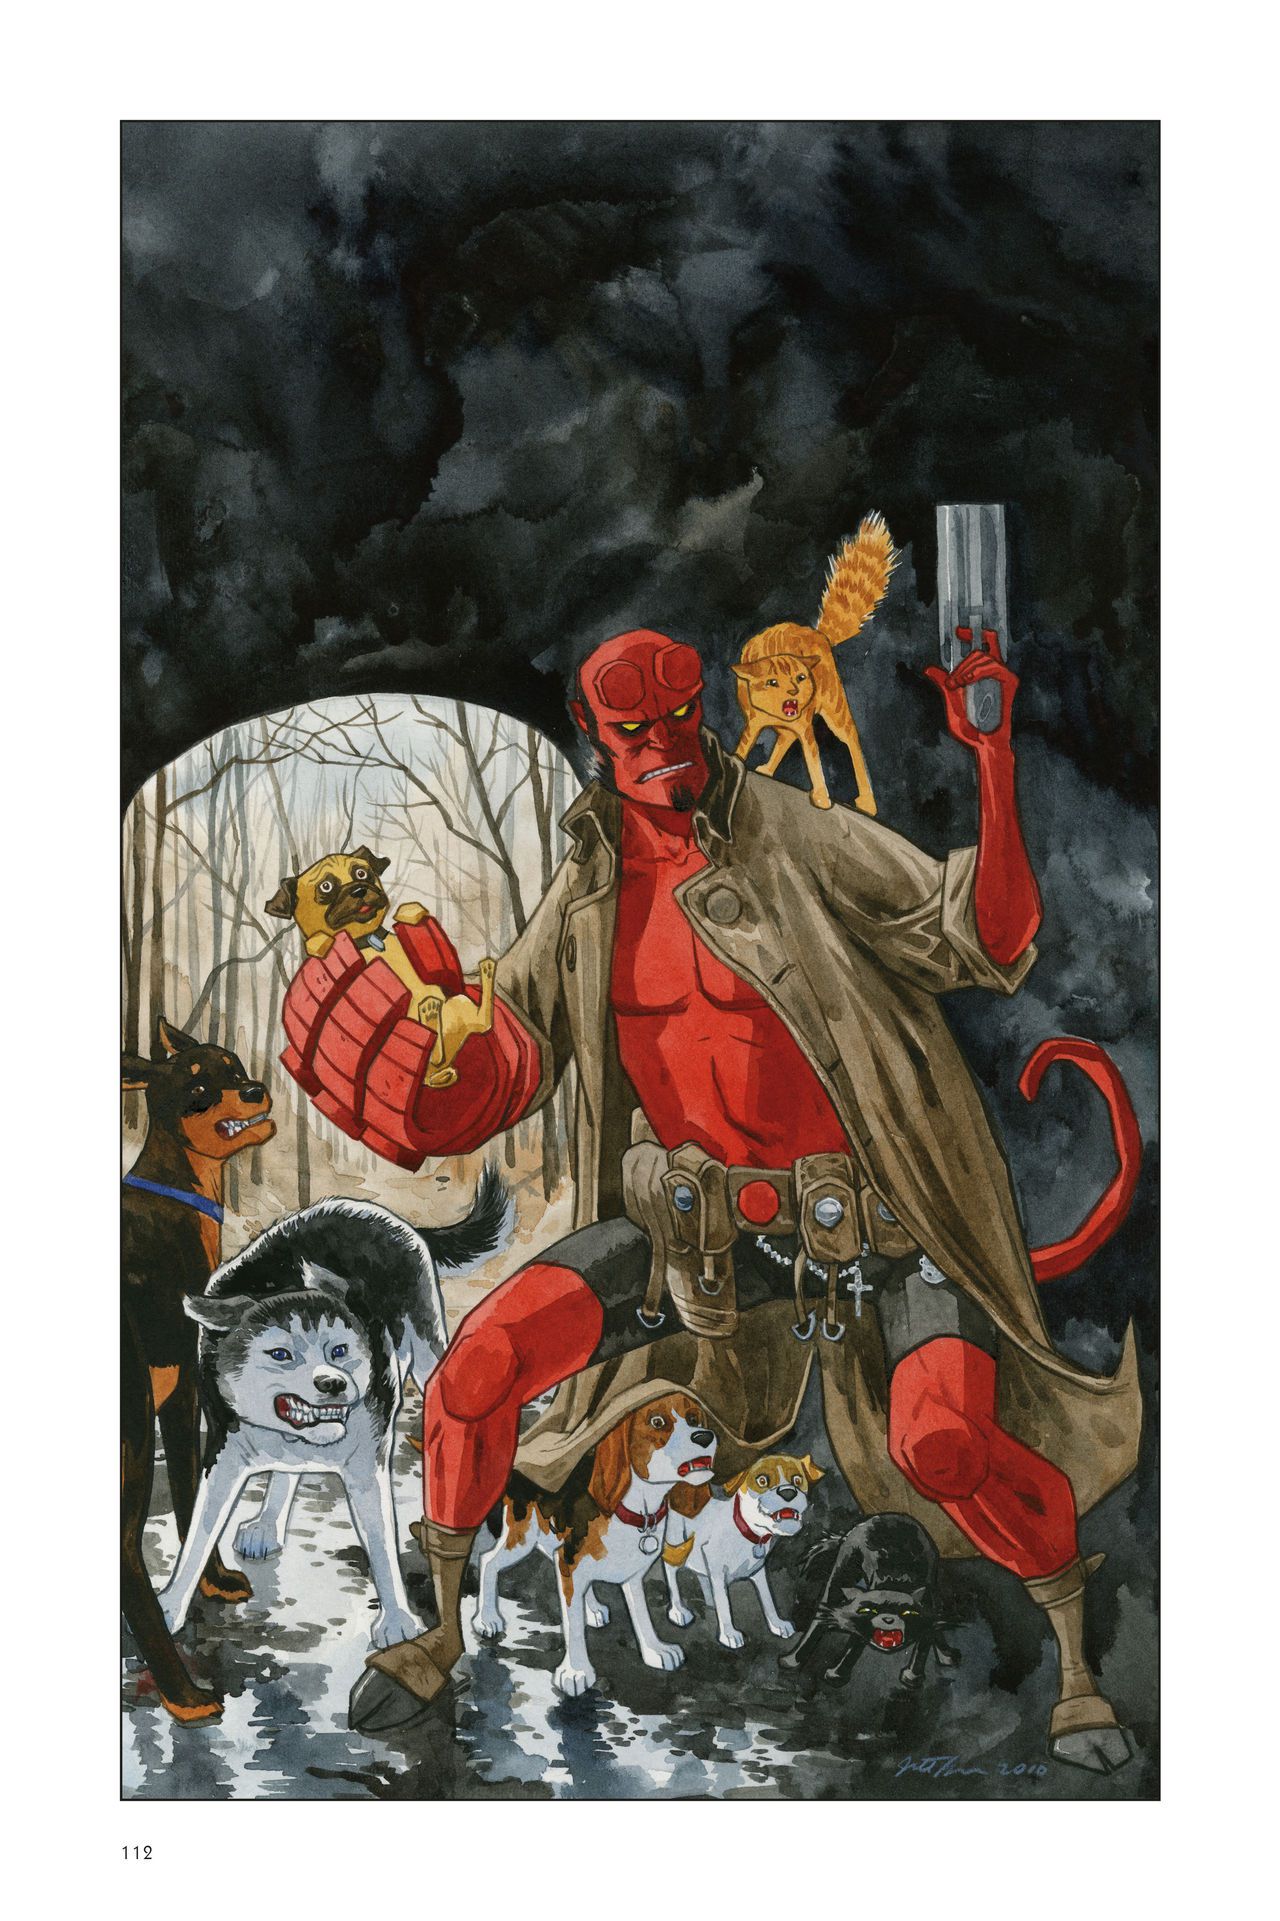 [Mike Mignola] Hellboy - 25 Years of Covers (2019) 114